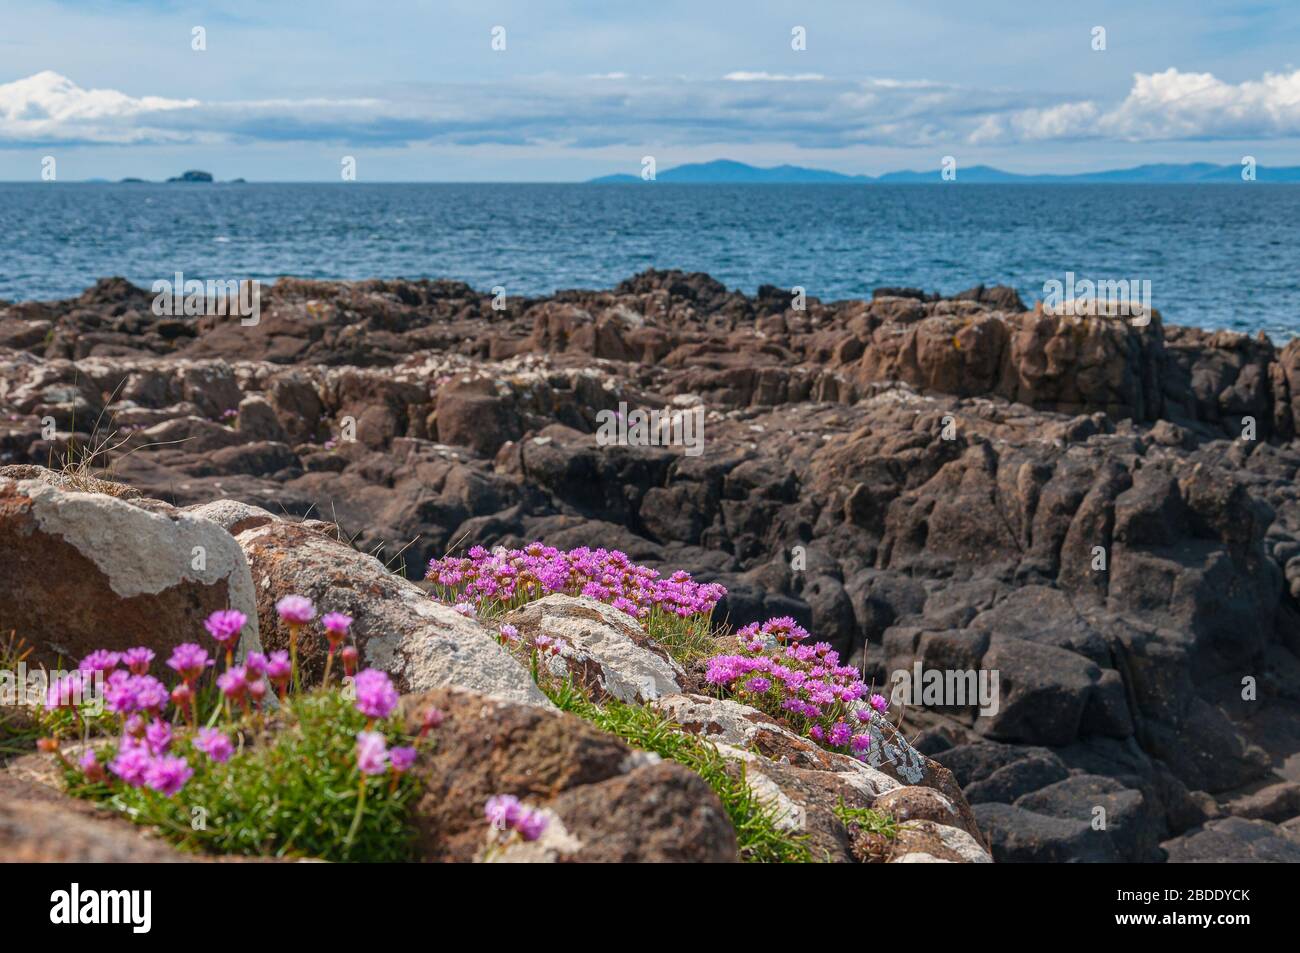 Small purple flowers growing on the cliffs of the Isle of Skye, Scotland Stock Photo